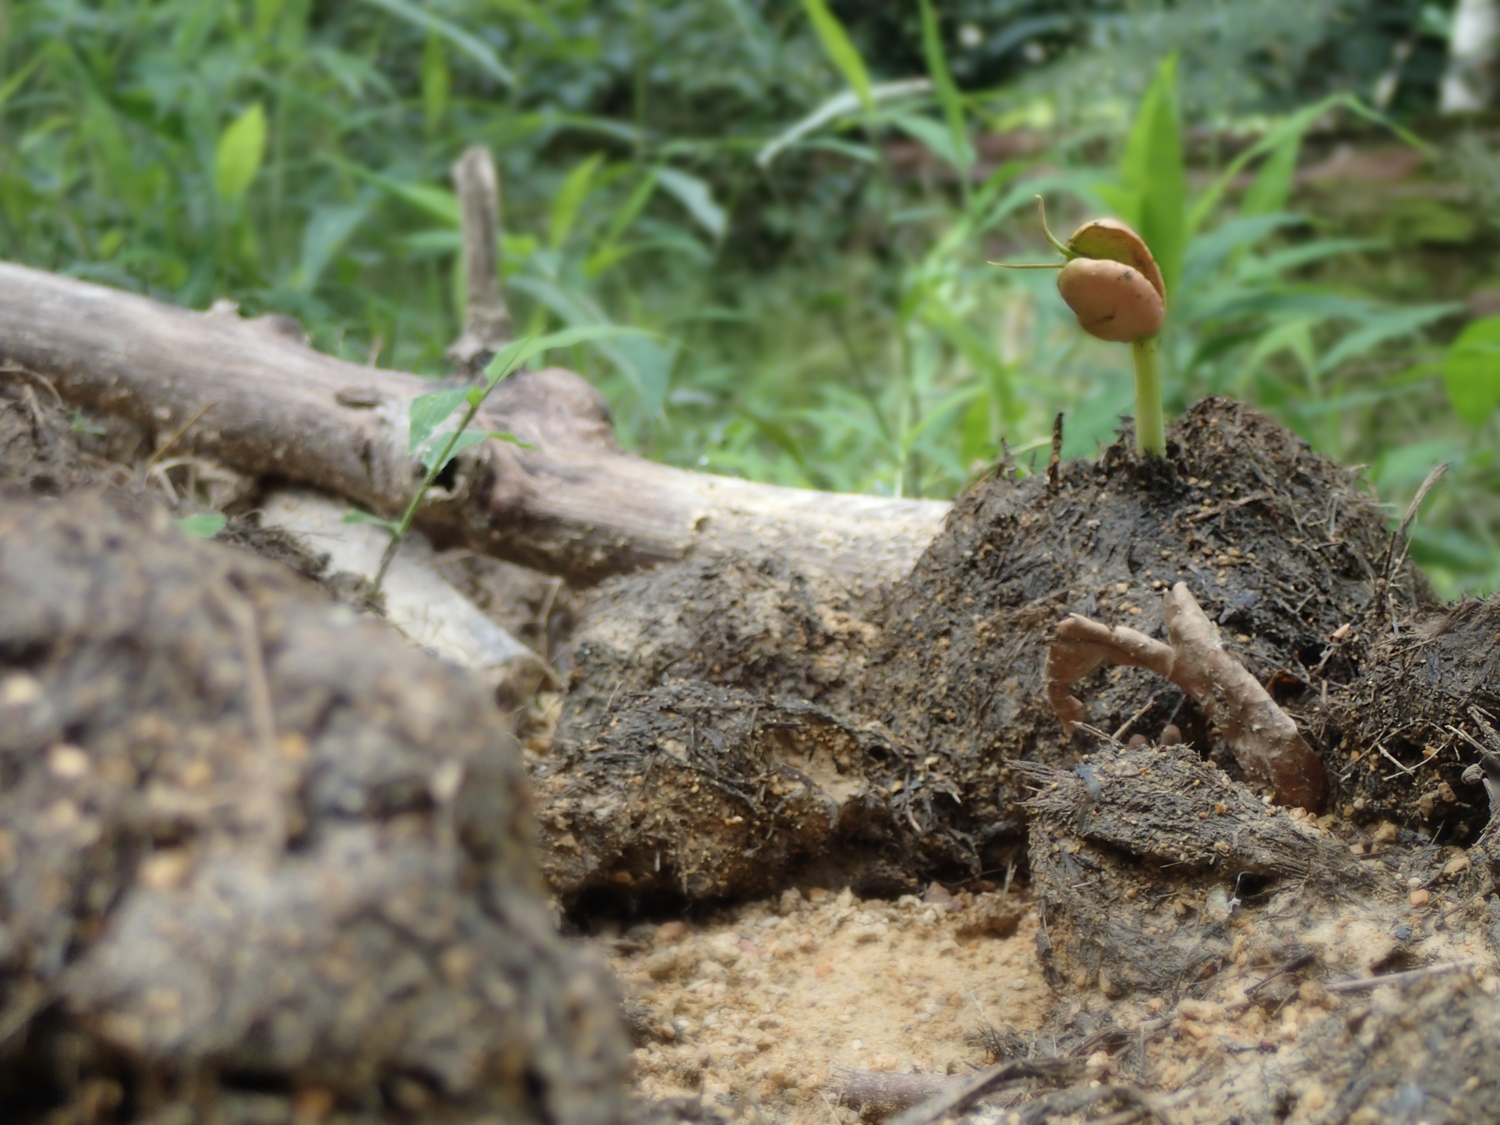 Seedling sprouting from elephant dung